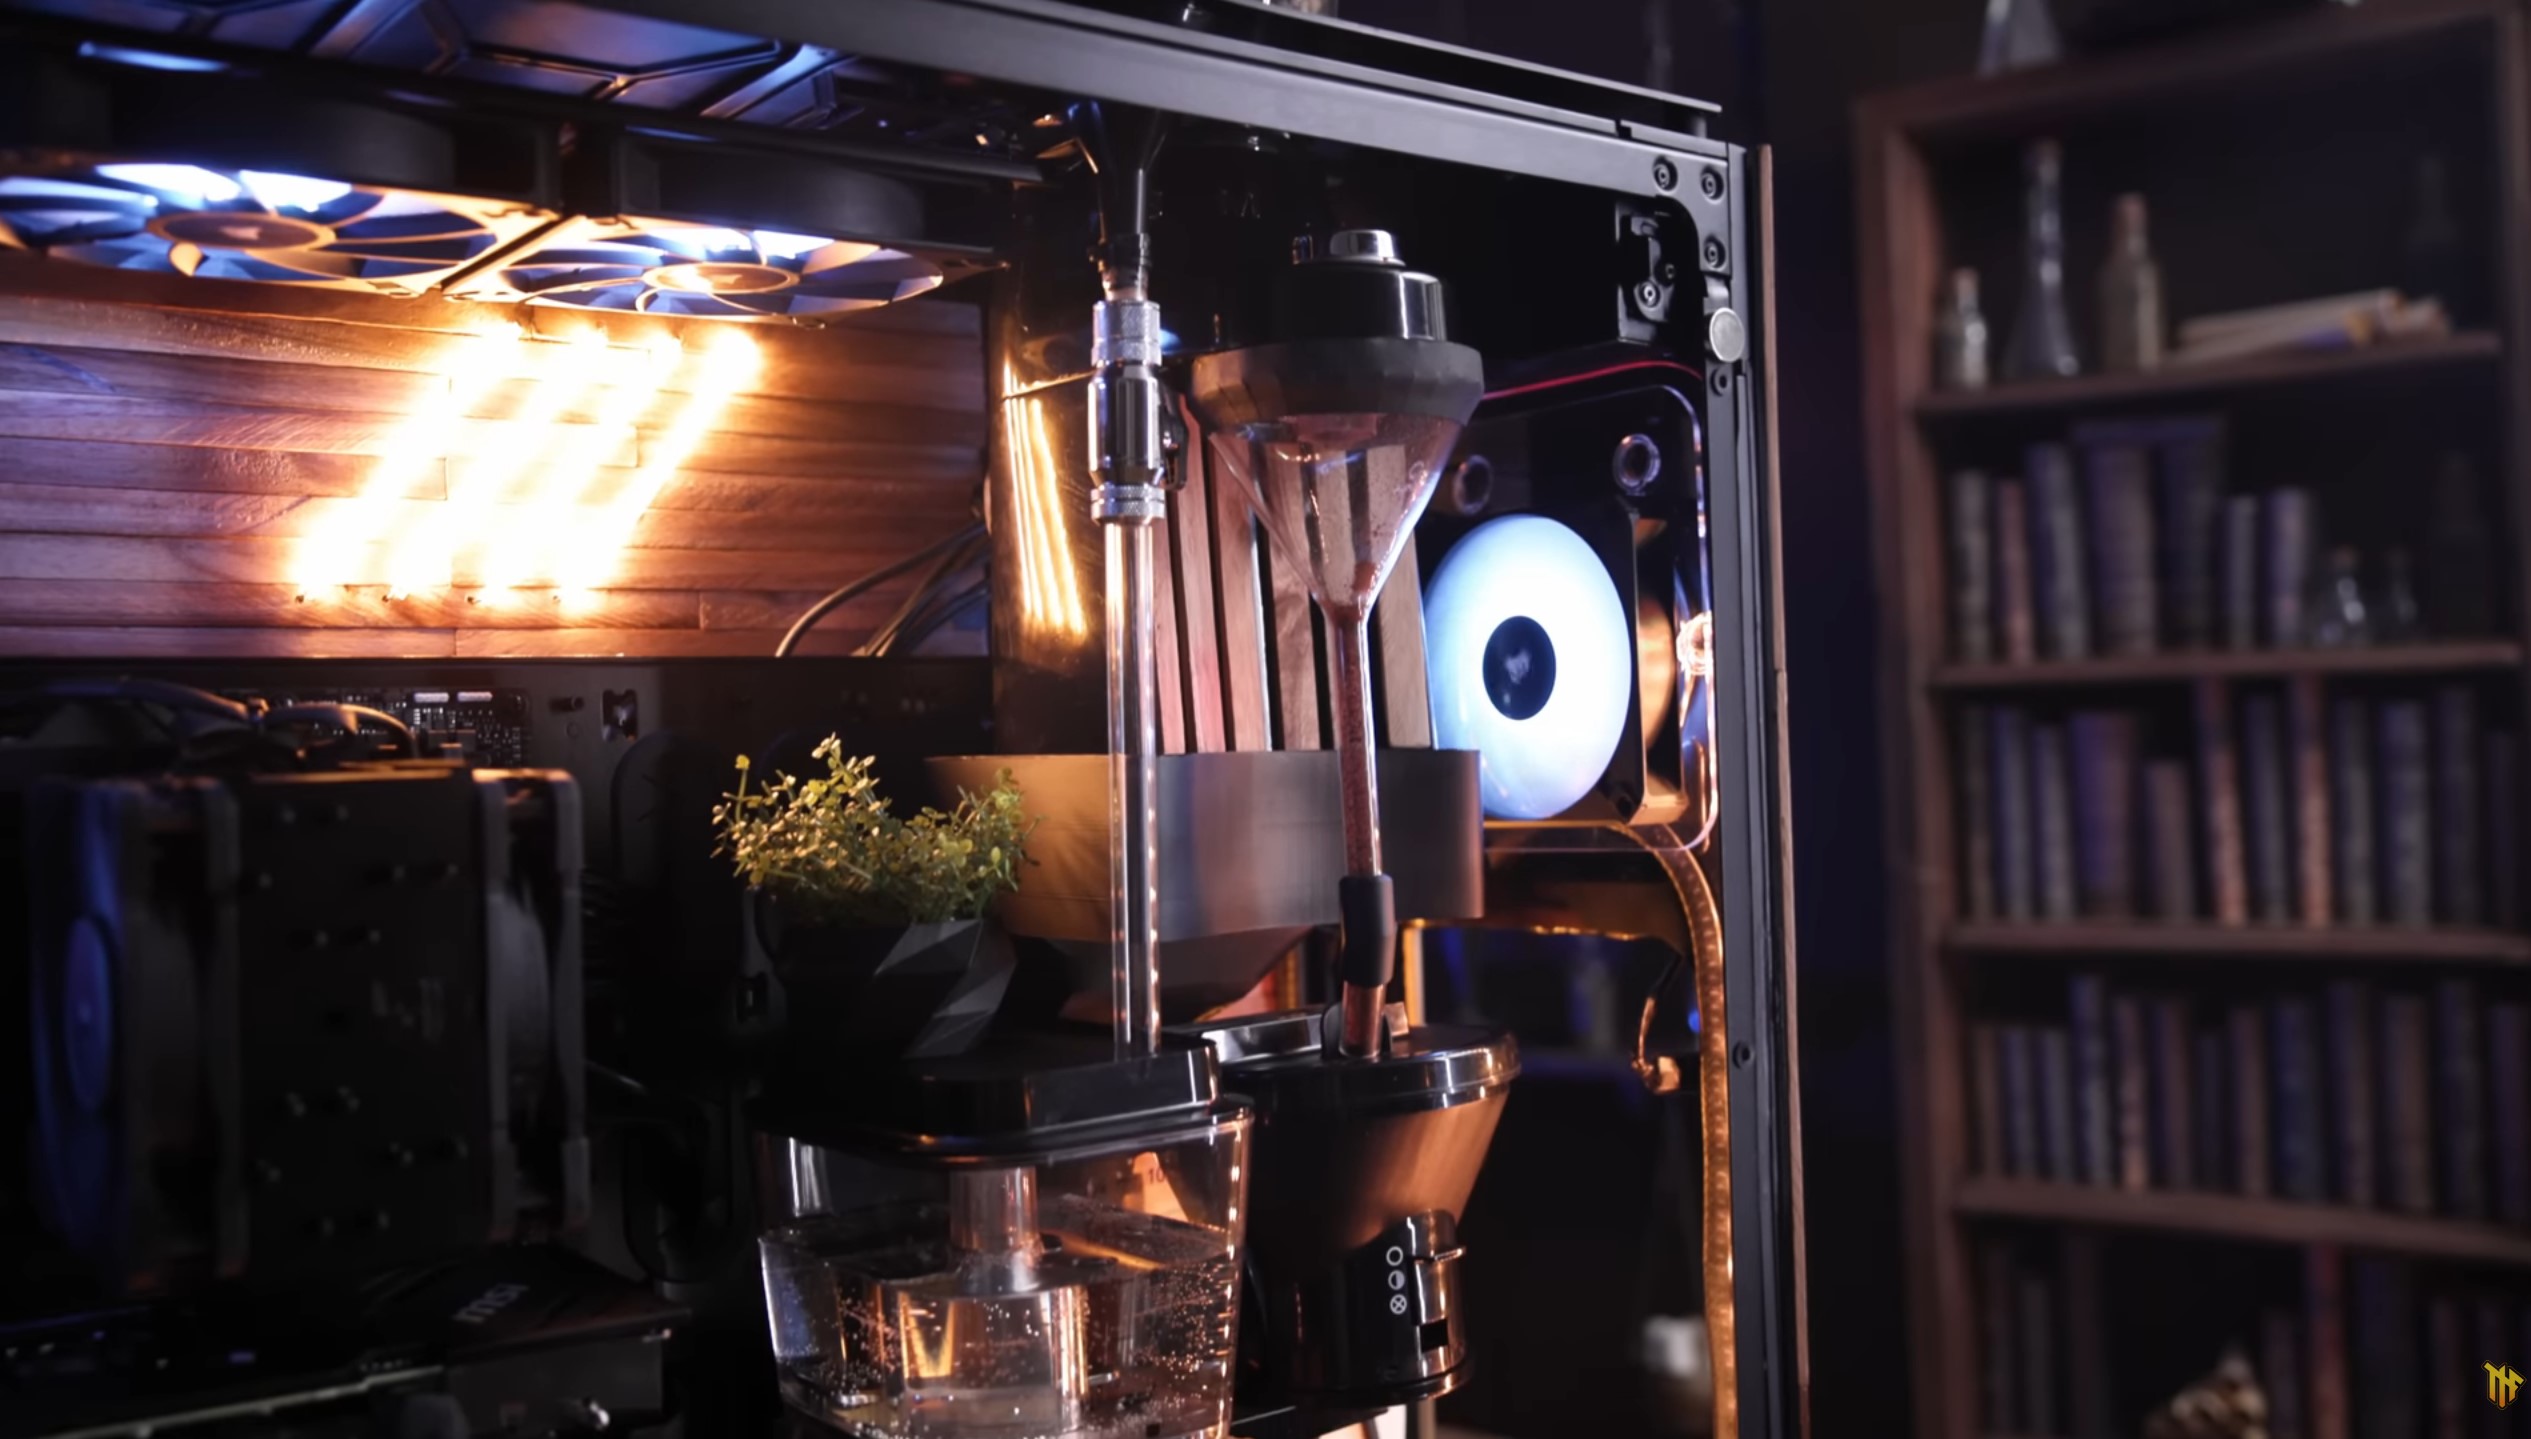 This gaming PC will also make you a cup of coffee